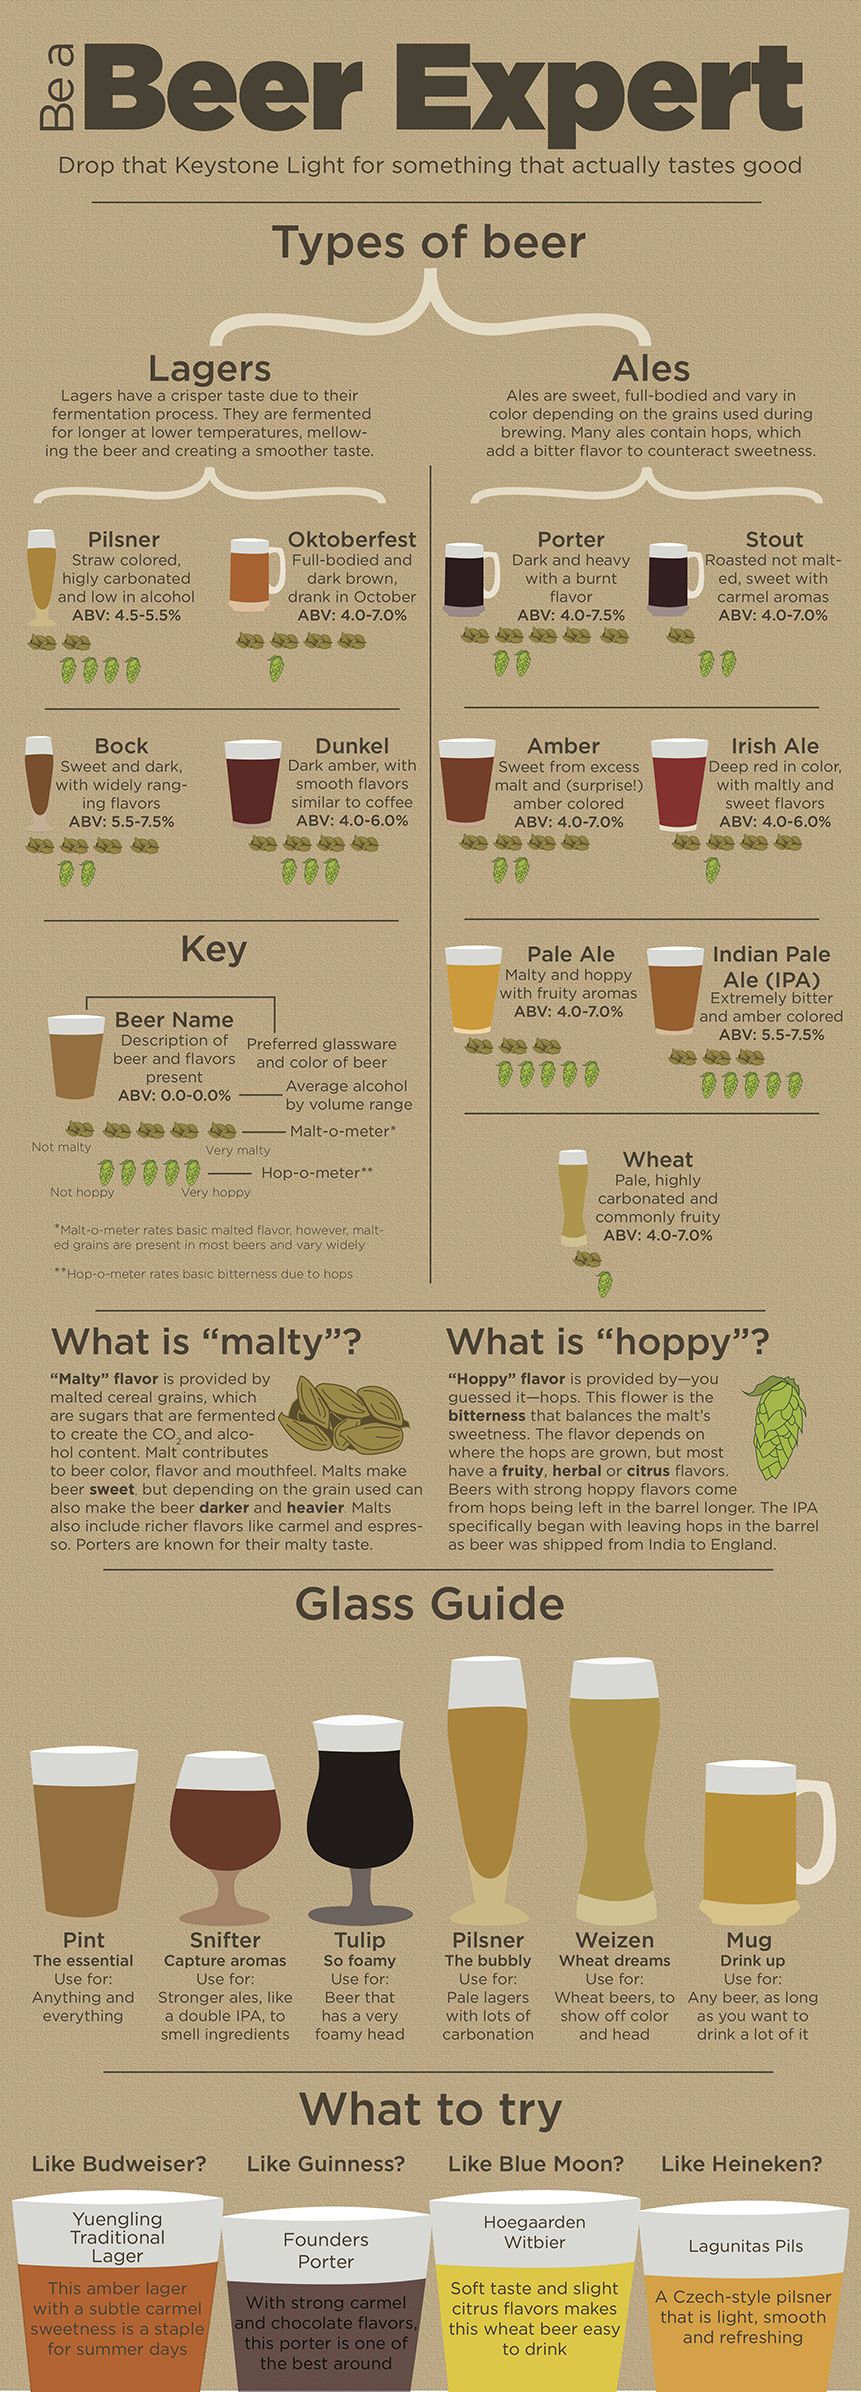 What Does the Beer You Drink Say About Your Personality?